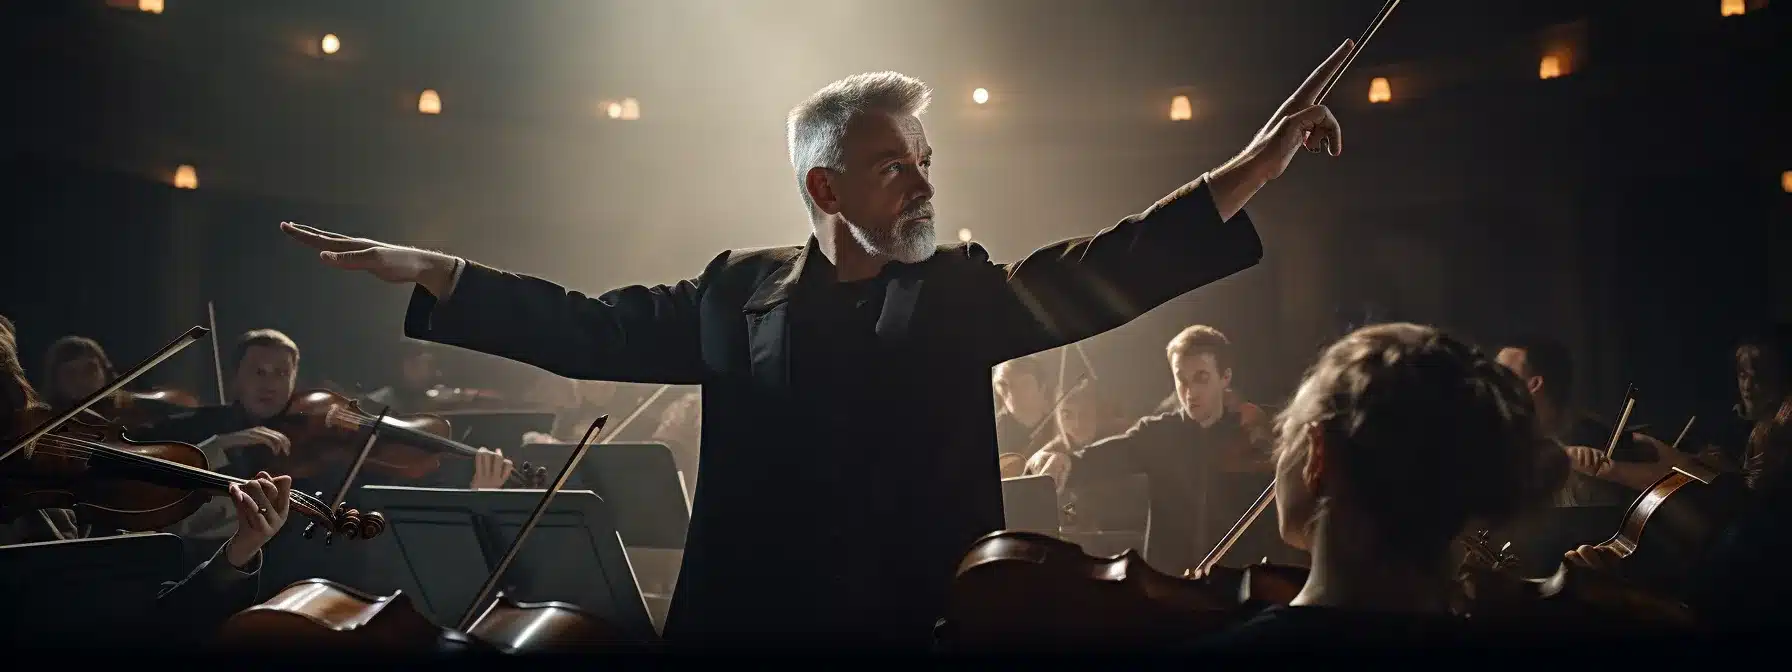 A Conductor Leading A Symphony Orchestra, Communicating Through The Baton.